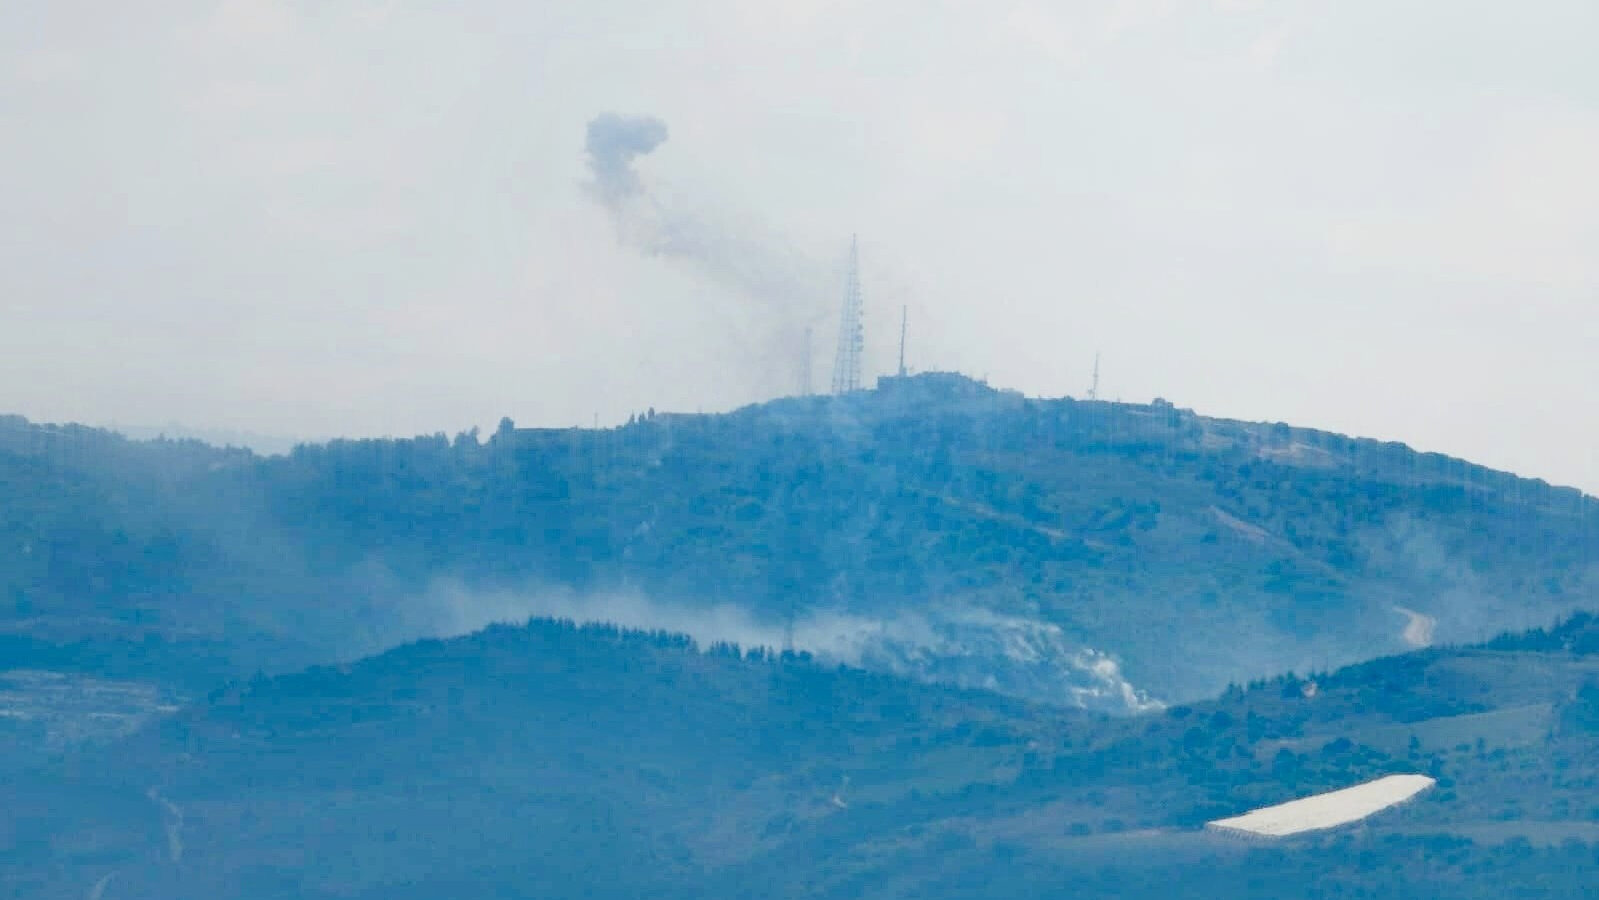 Lebanon Front Update: Hezbollah, Allies Launch More Attacks Against Israeli Army (Photos)